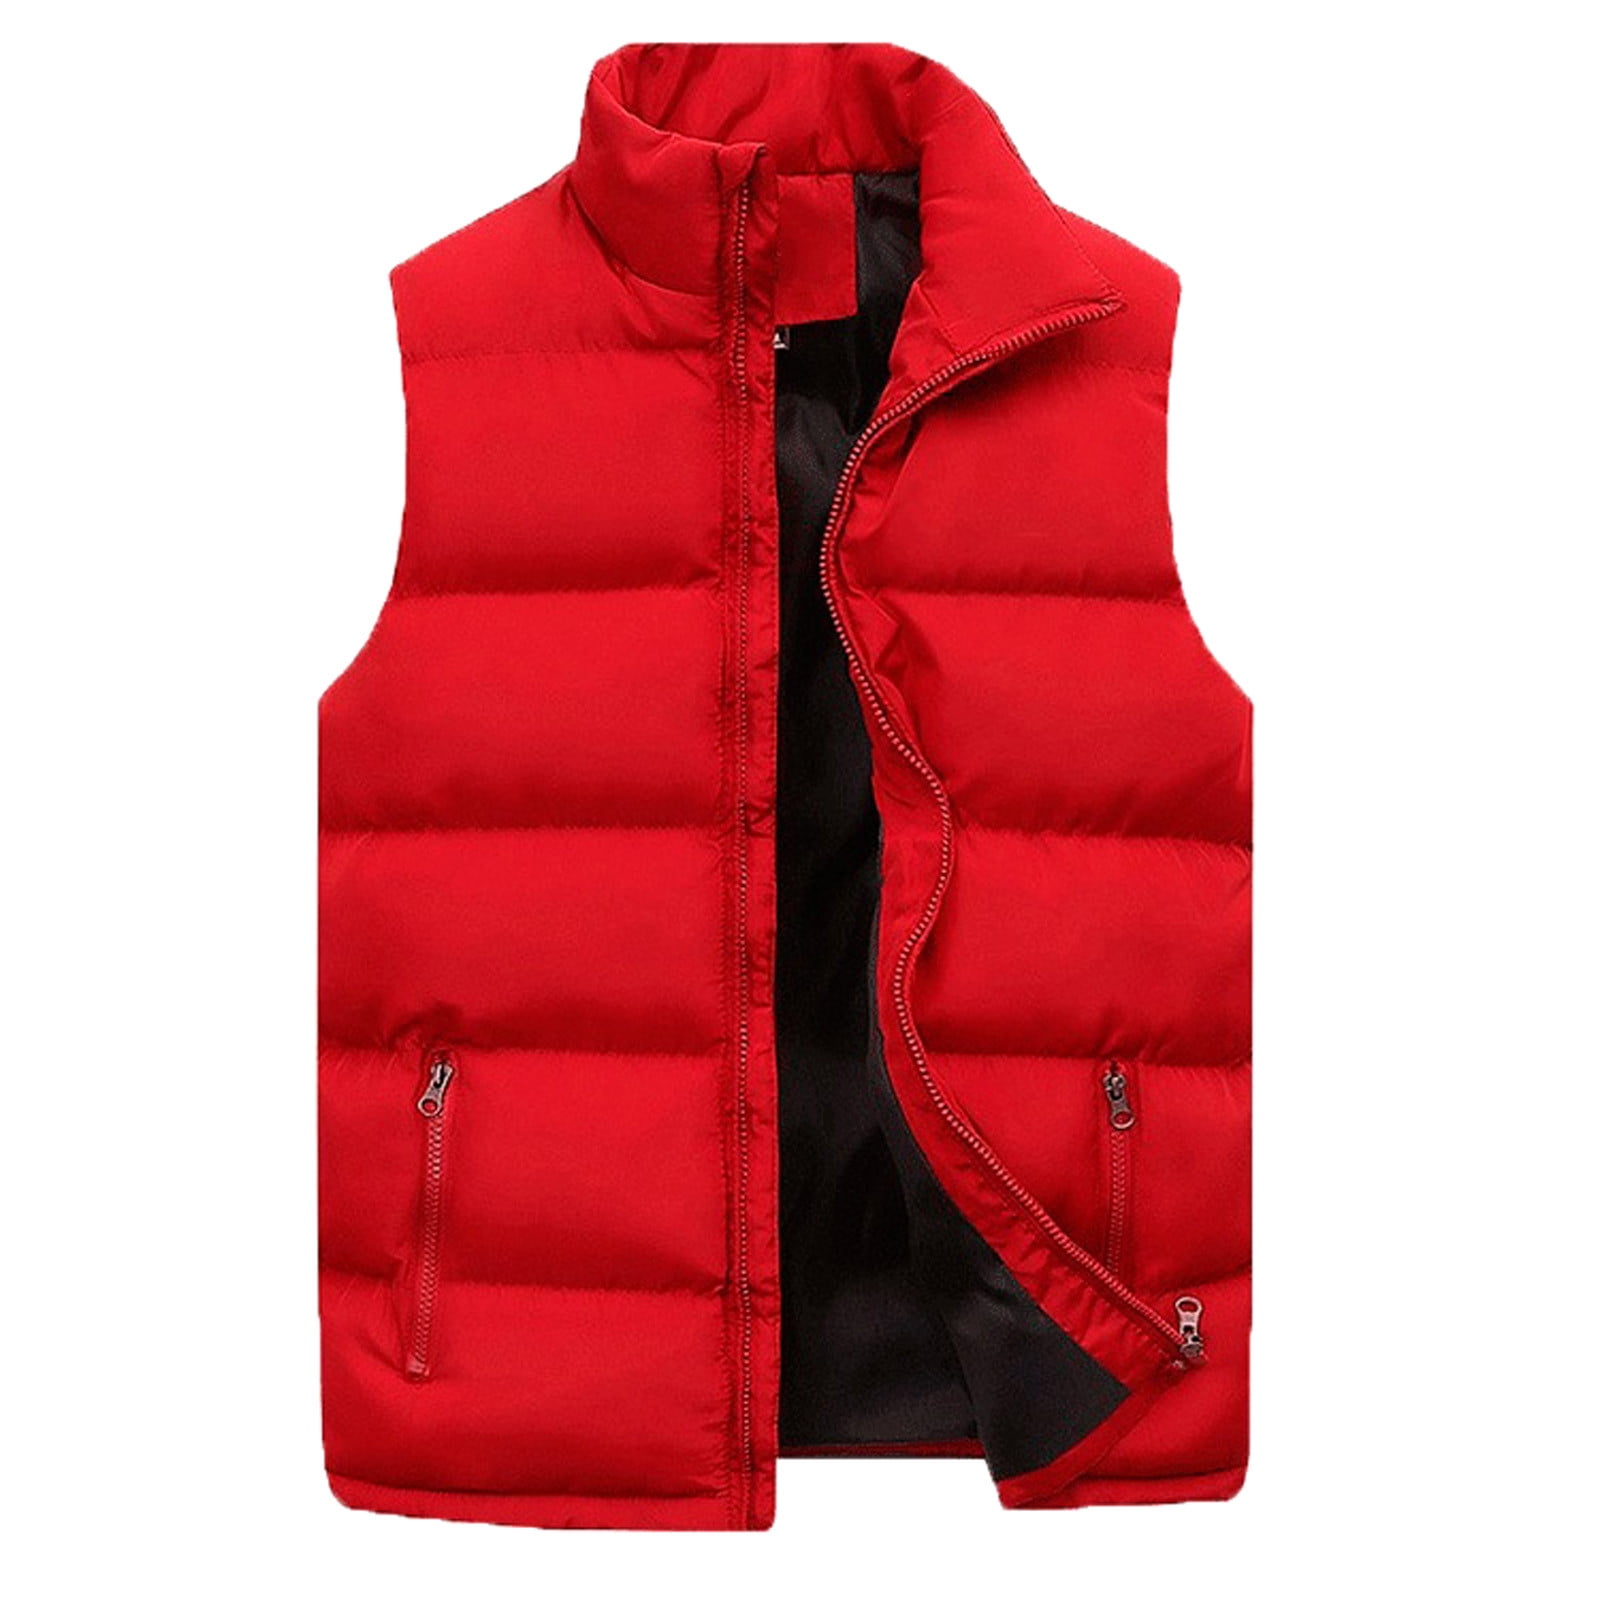 Foam House 10 Star Men Women Autumn And Winter Fashion Casual Solid Color  Zipper Collar Sleeveless Cotton Padded Vest Top Features 